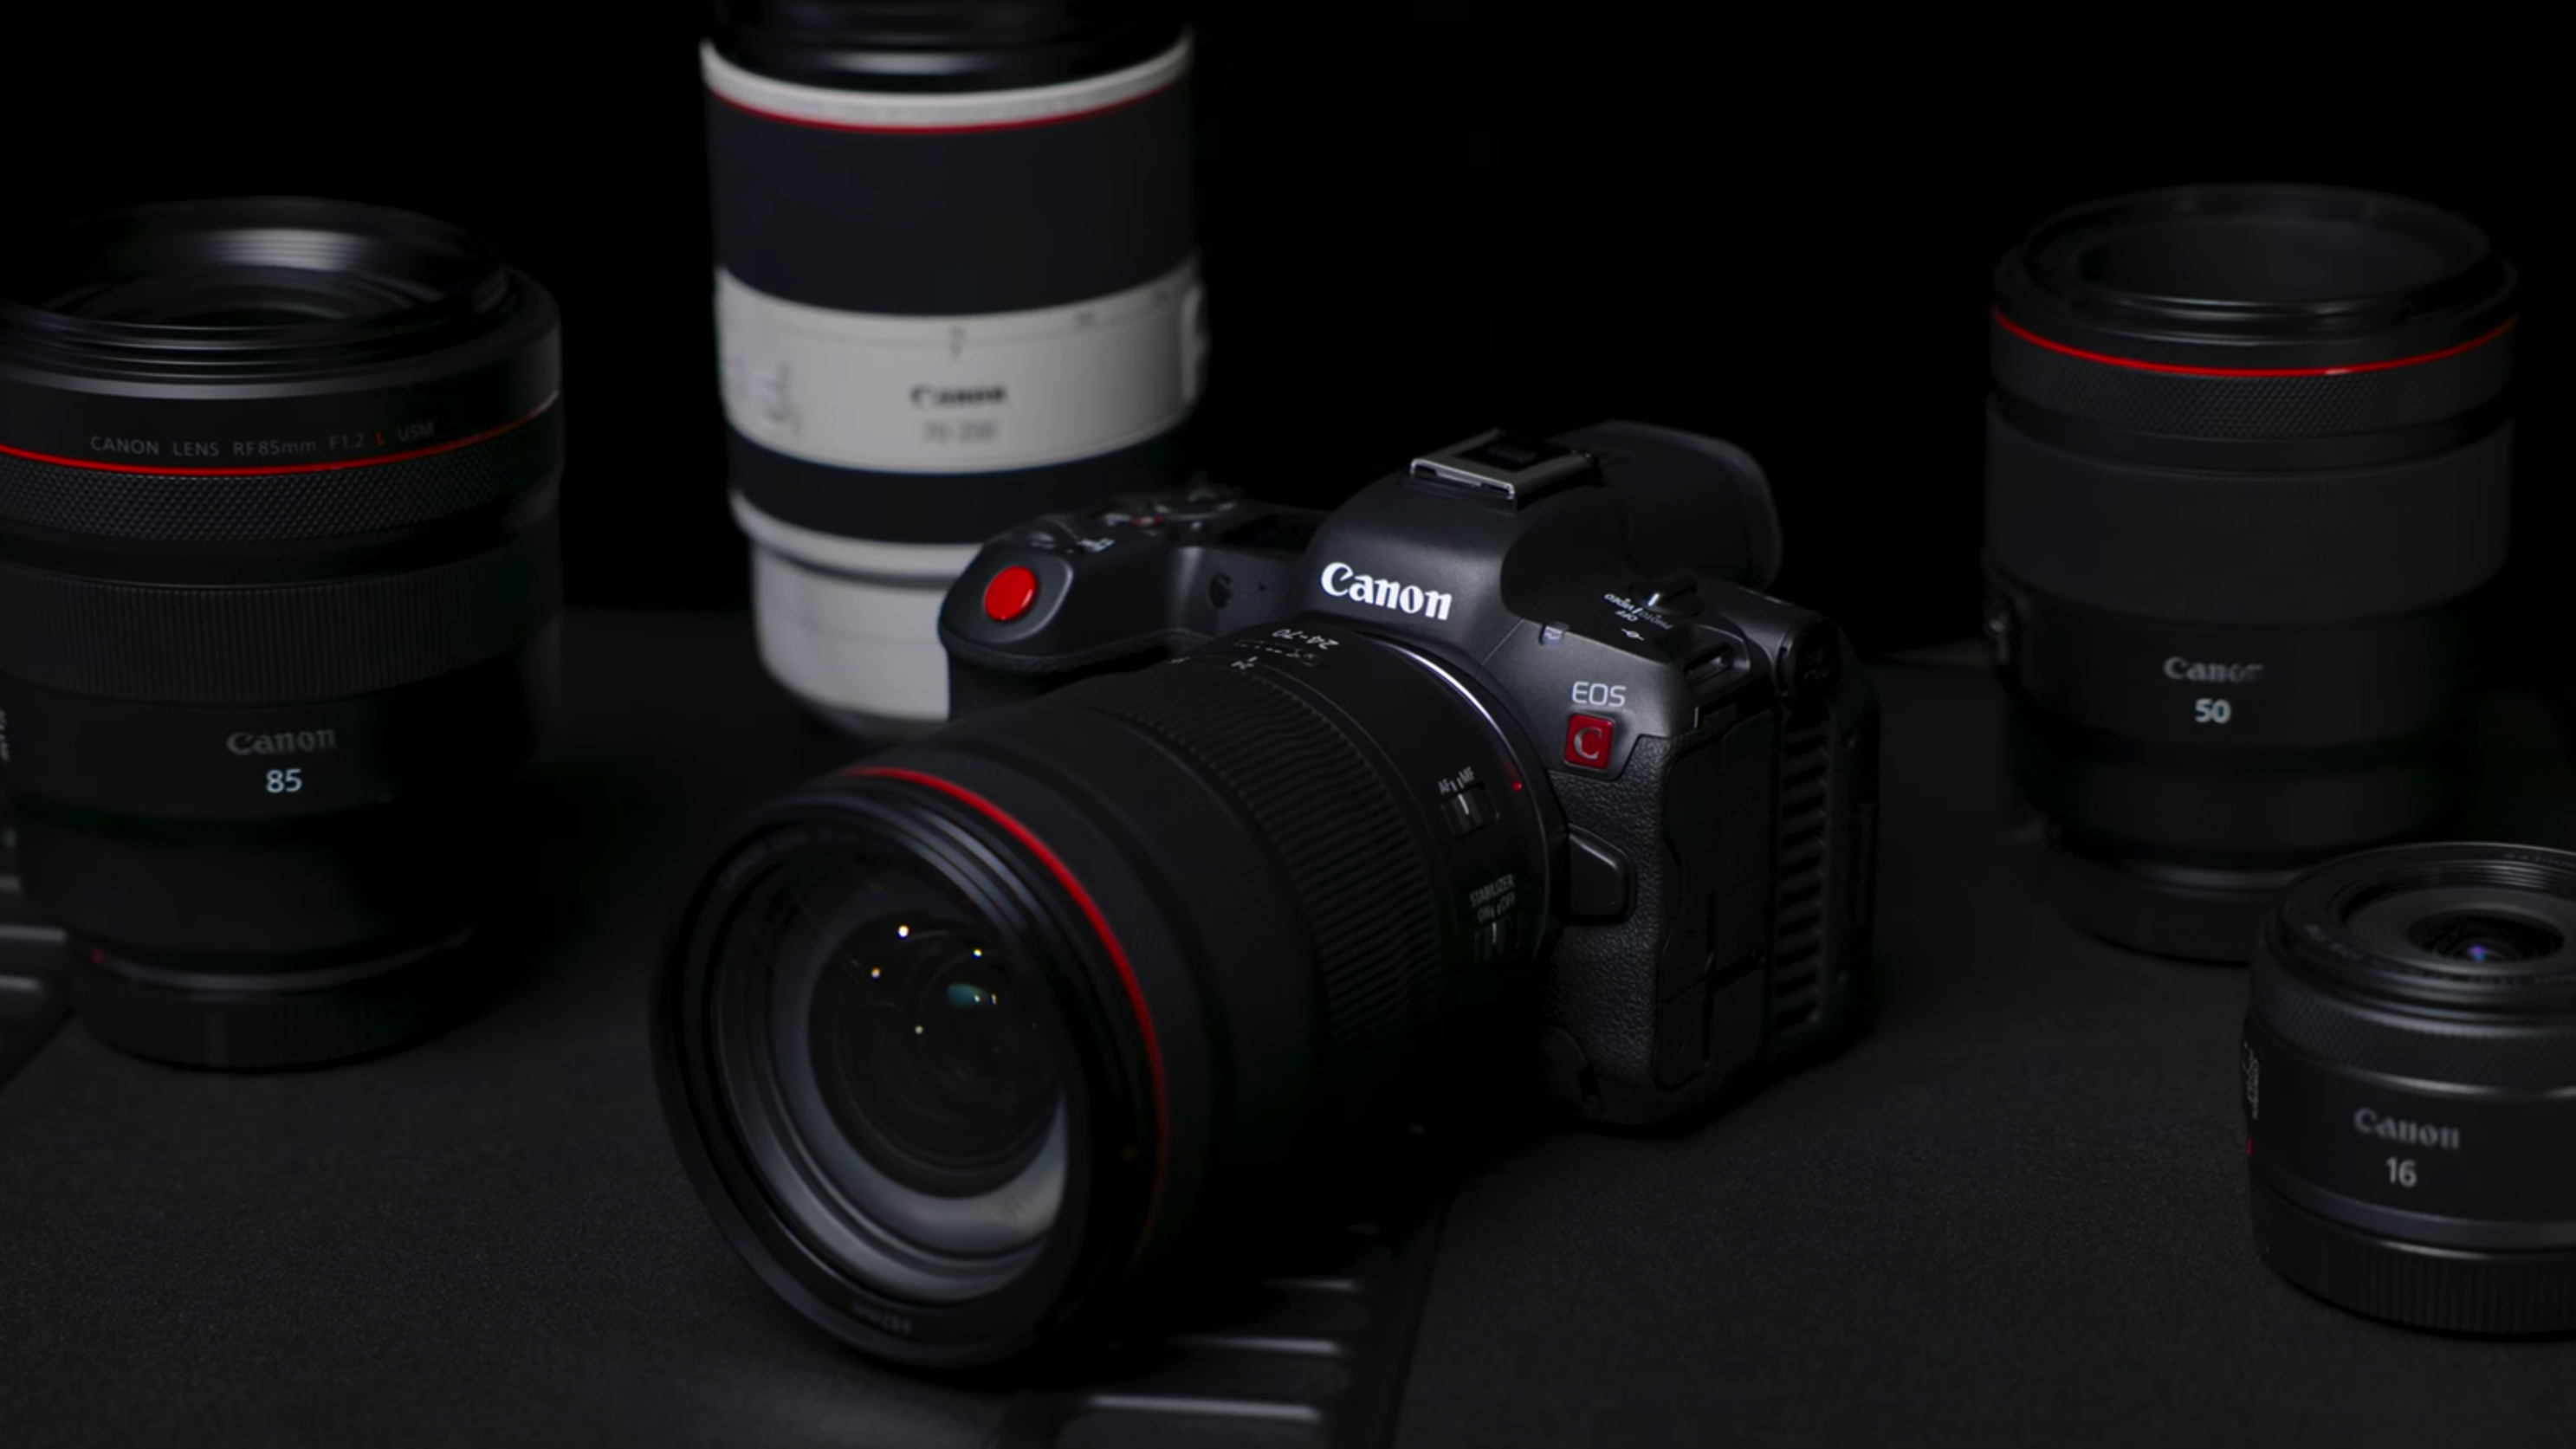 The Canon EOS R5 C camera surrounded by lenses